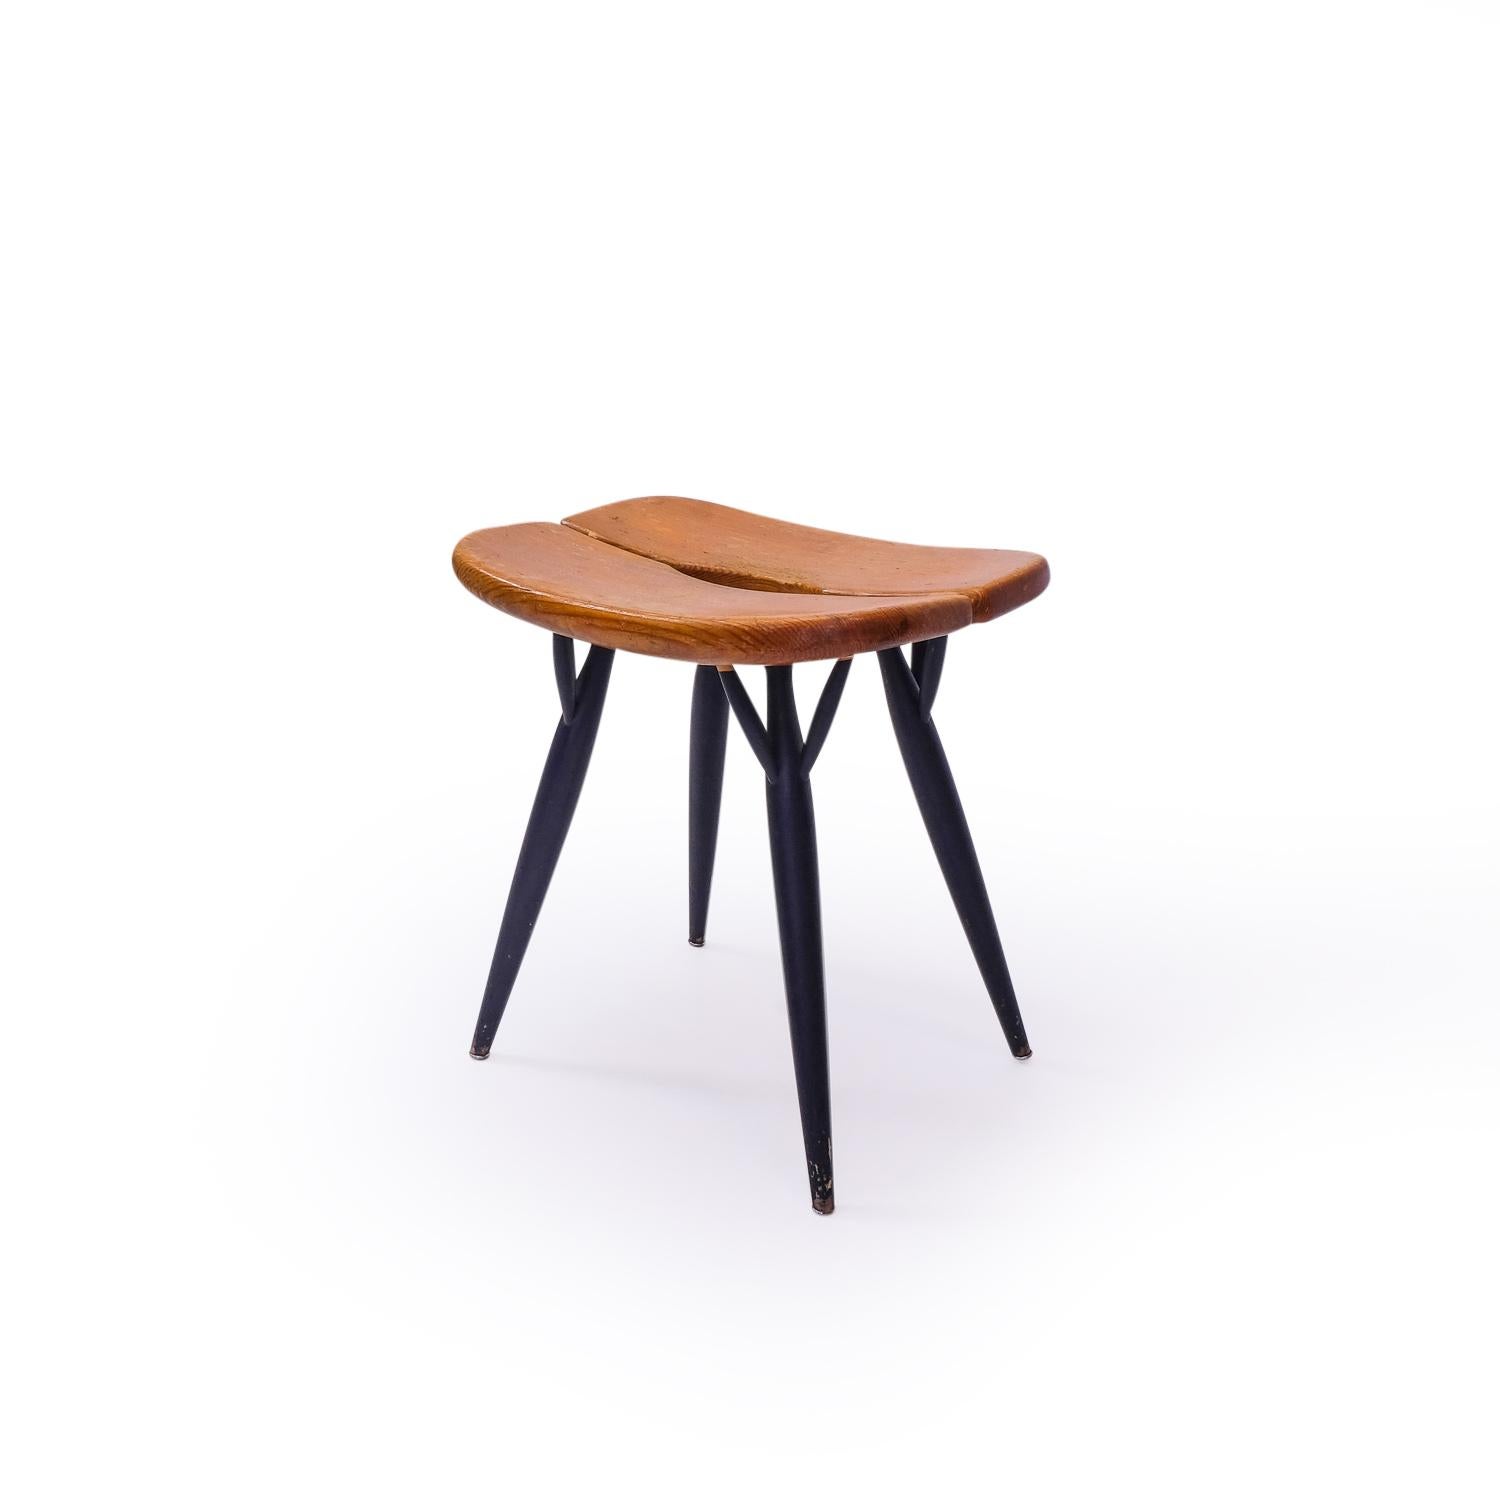 Early Pirrka Series Stool in pine produced by Asko, Finland. This rare piece was designed as a lower version of the regular height Pirrka stool.

Ilmari Tapiovaara (1914) was a Finnish interior and design furniture, during his long career that